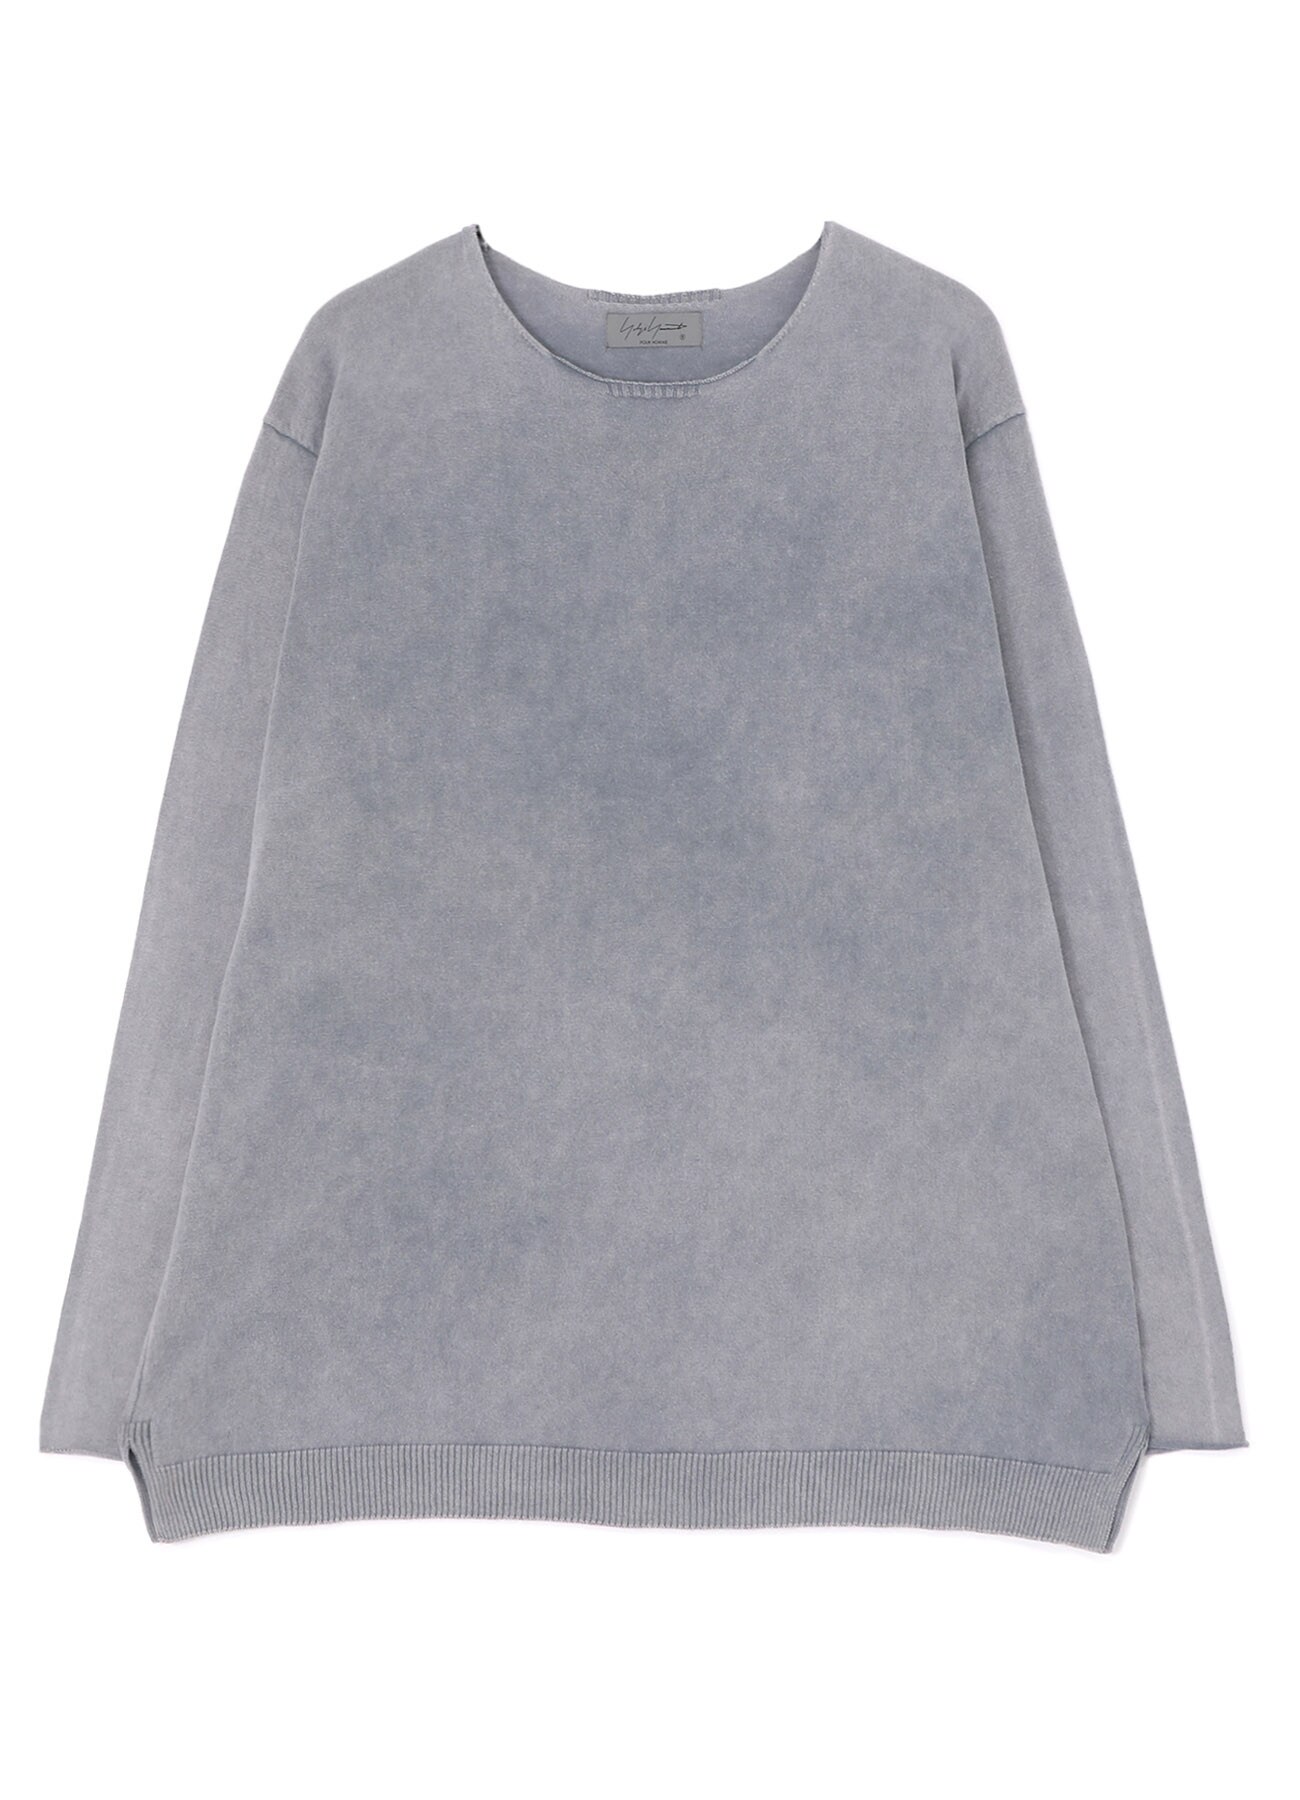 DISCHARGE PRINTED ROUND NECK LONG SLEEVE T-SHIRT